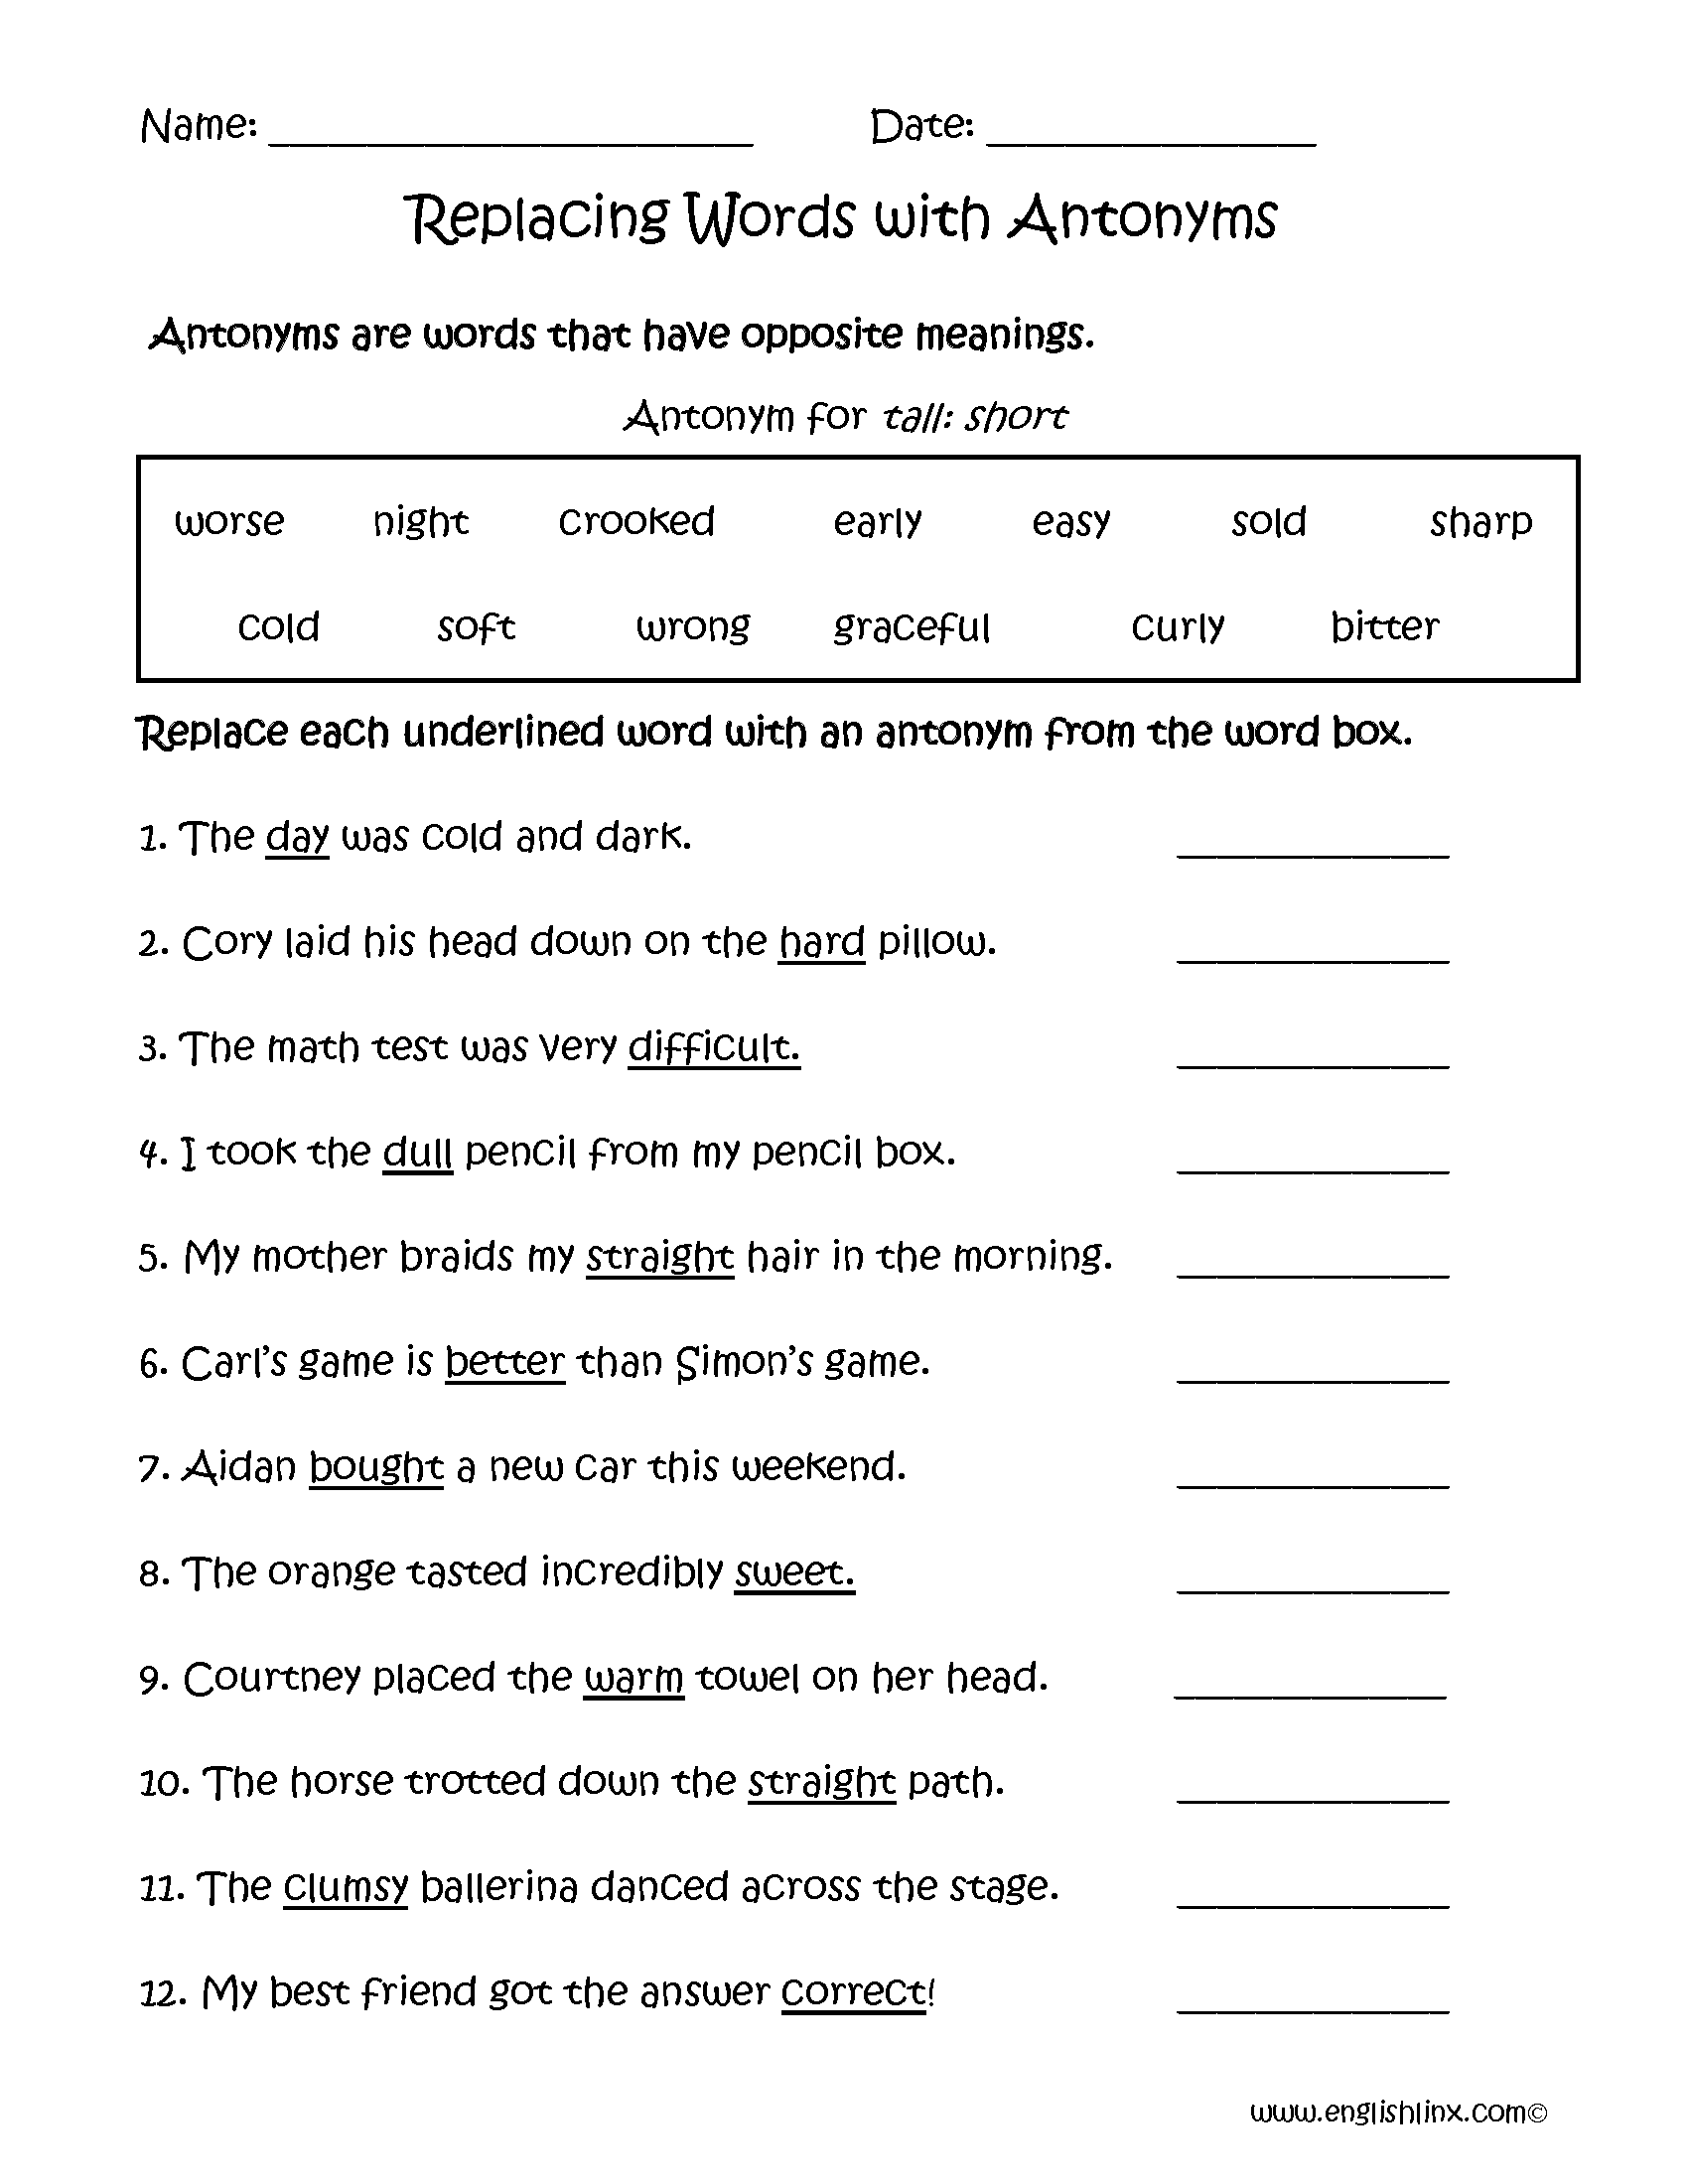 Synonyms And Antonyms Worksheet For Grade 5